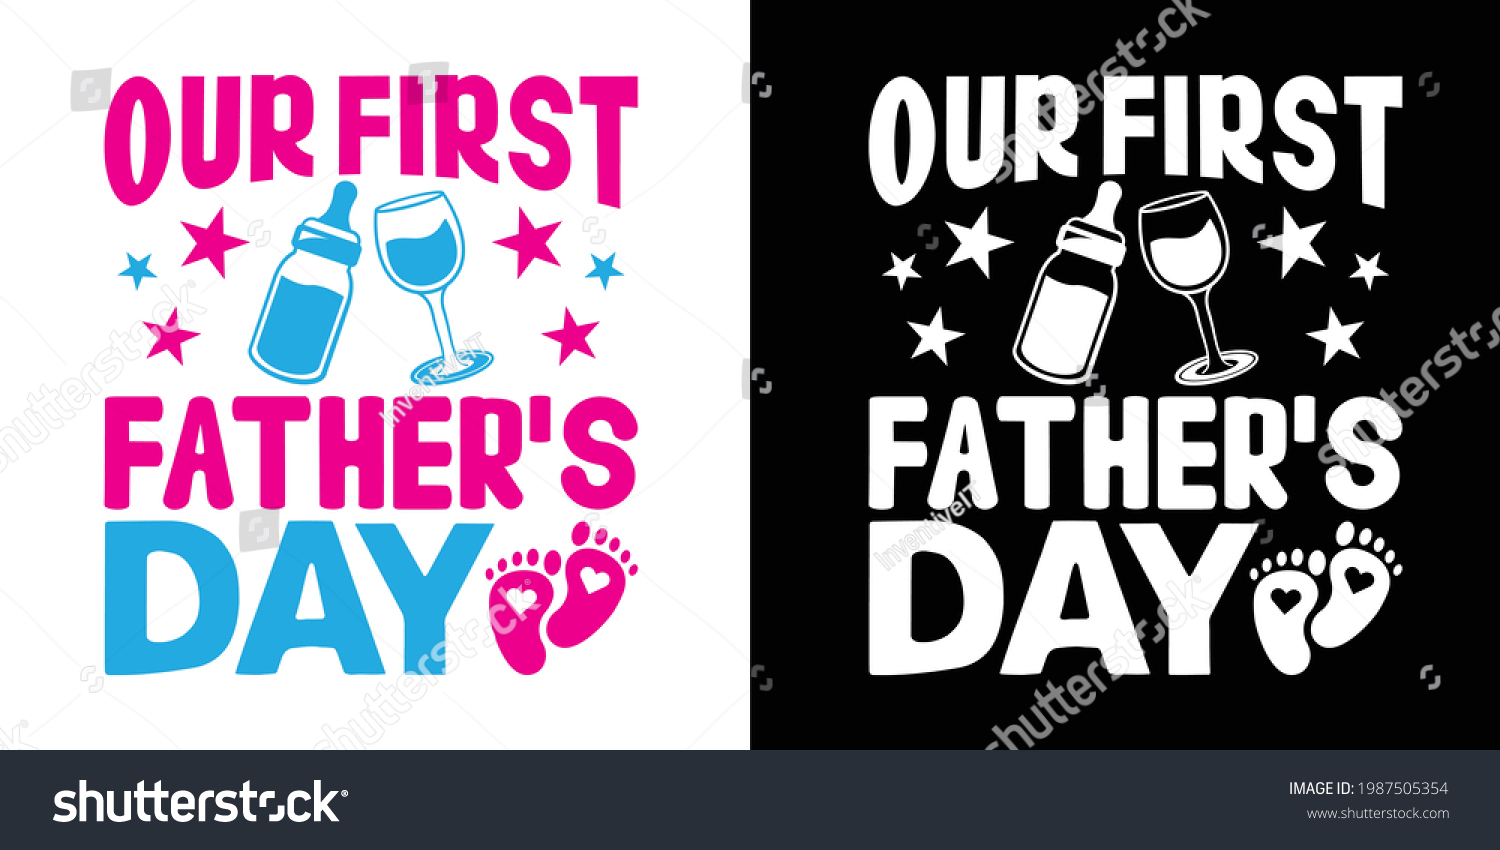 SVG of Our First Fathers Day Printable Vector Illustration svg